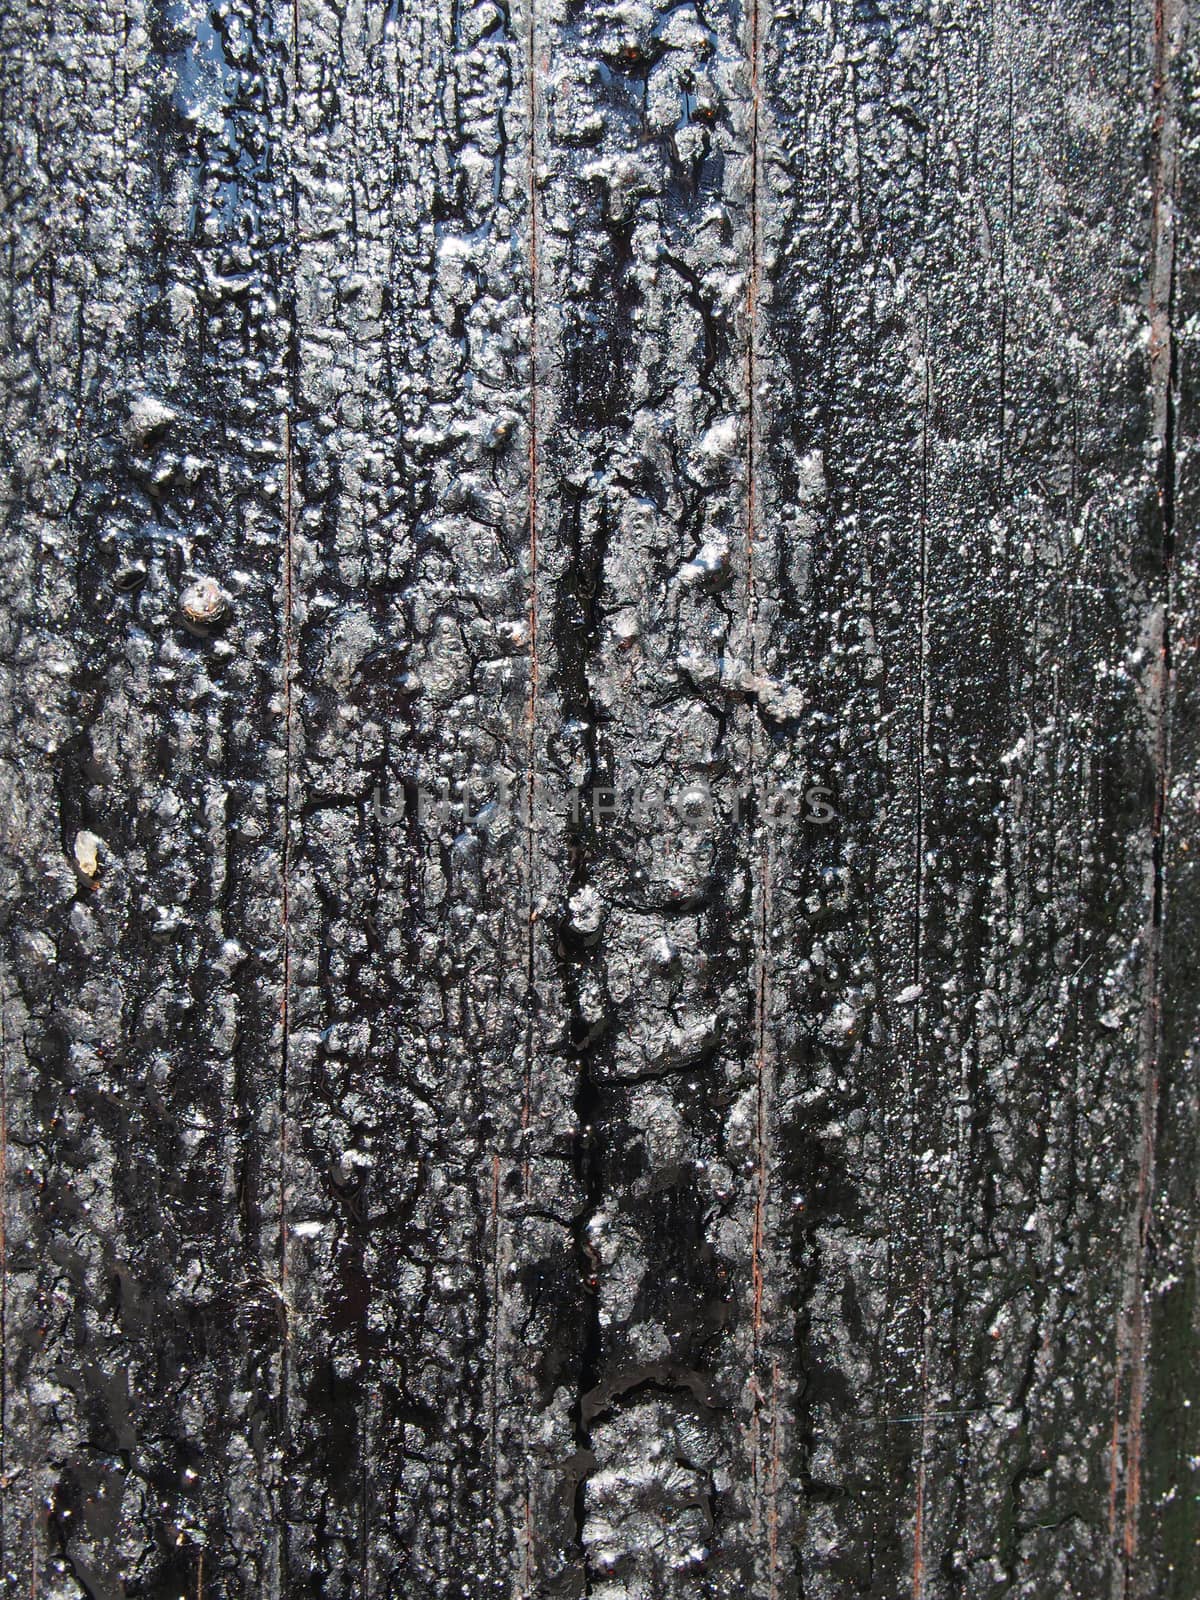 a black melting old bitumen preservative covered textured wooden surface by philopenshaw